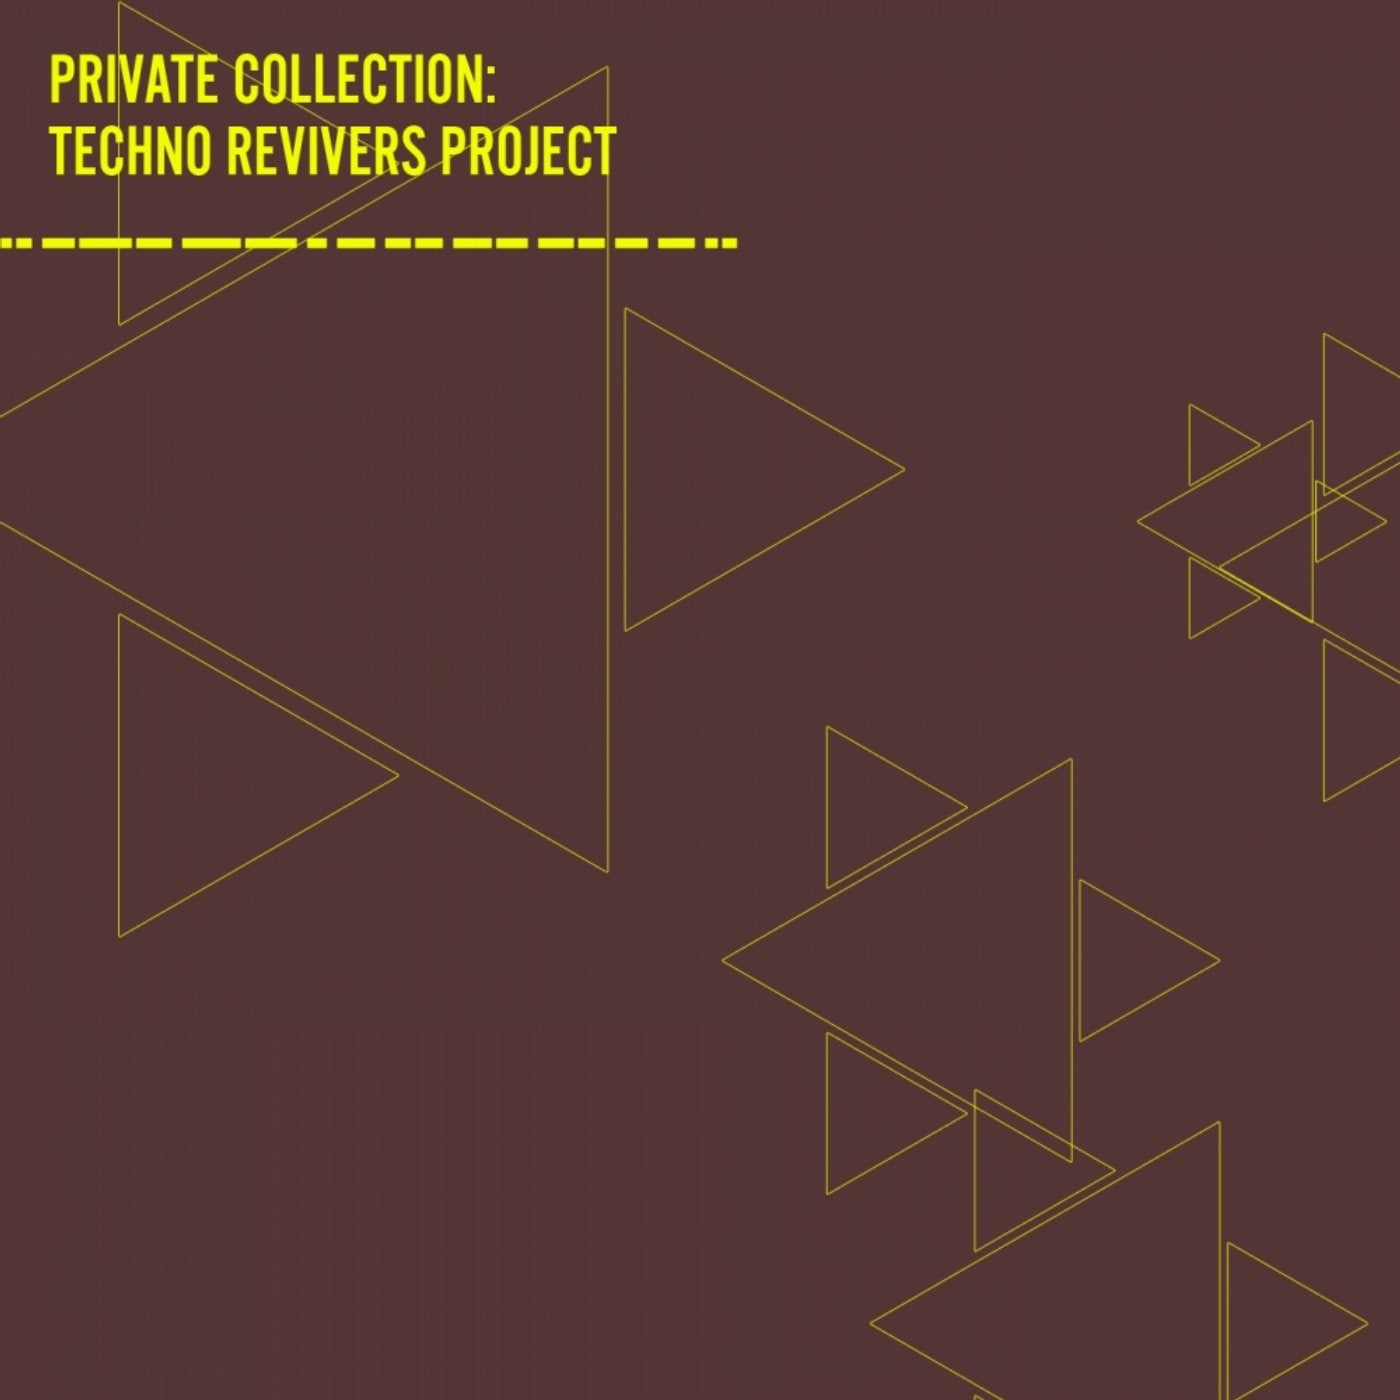 Private Collection: Techno Revivers Project